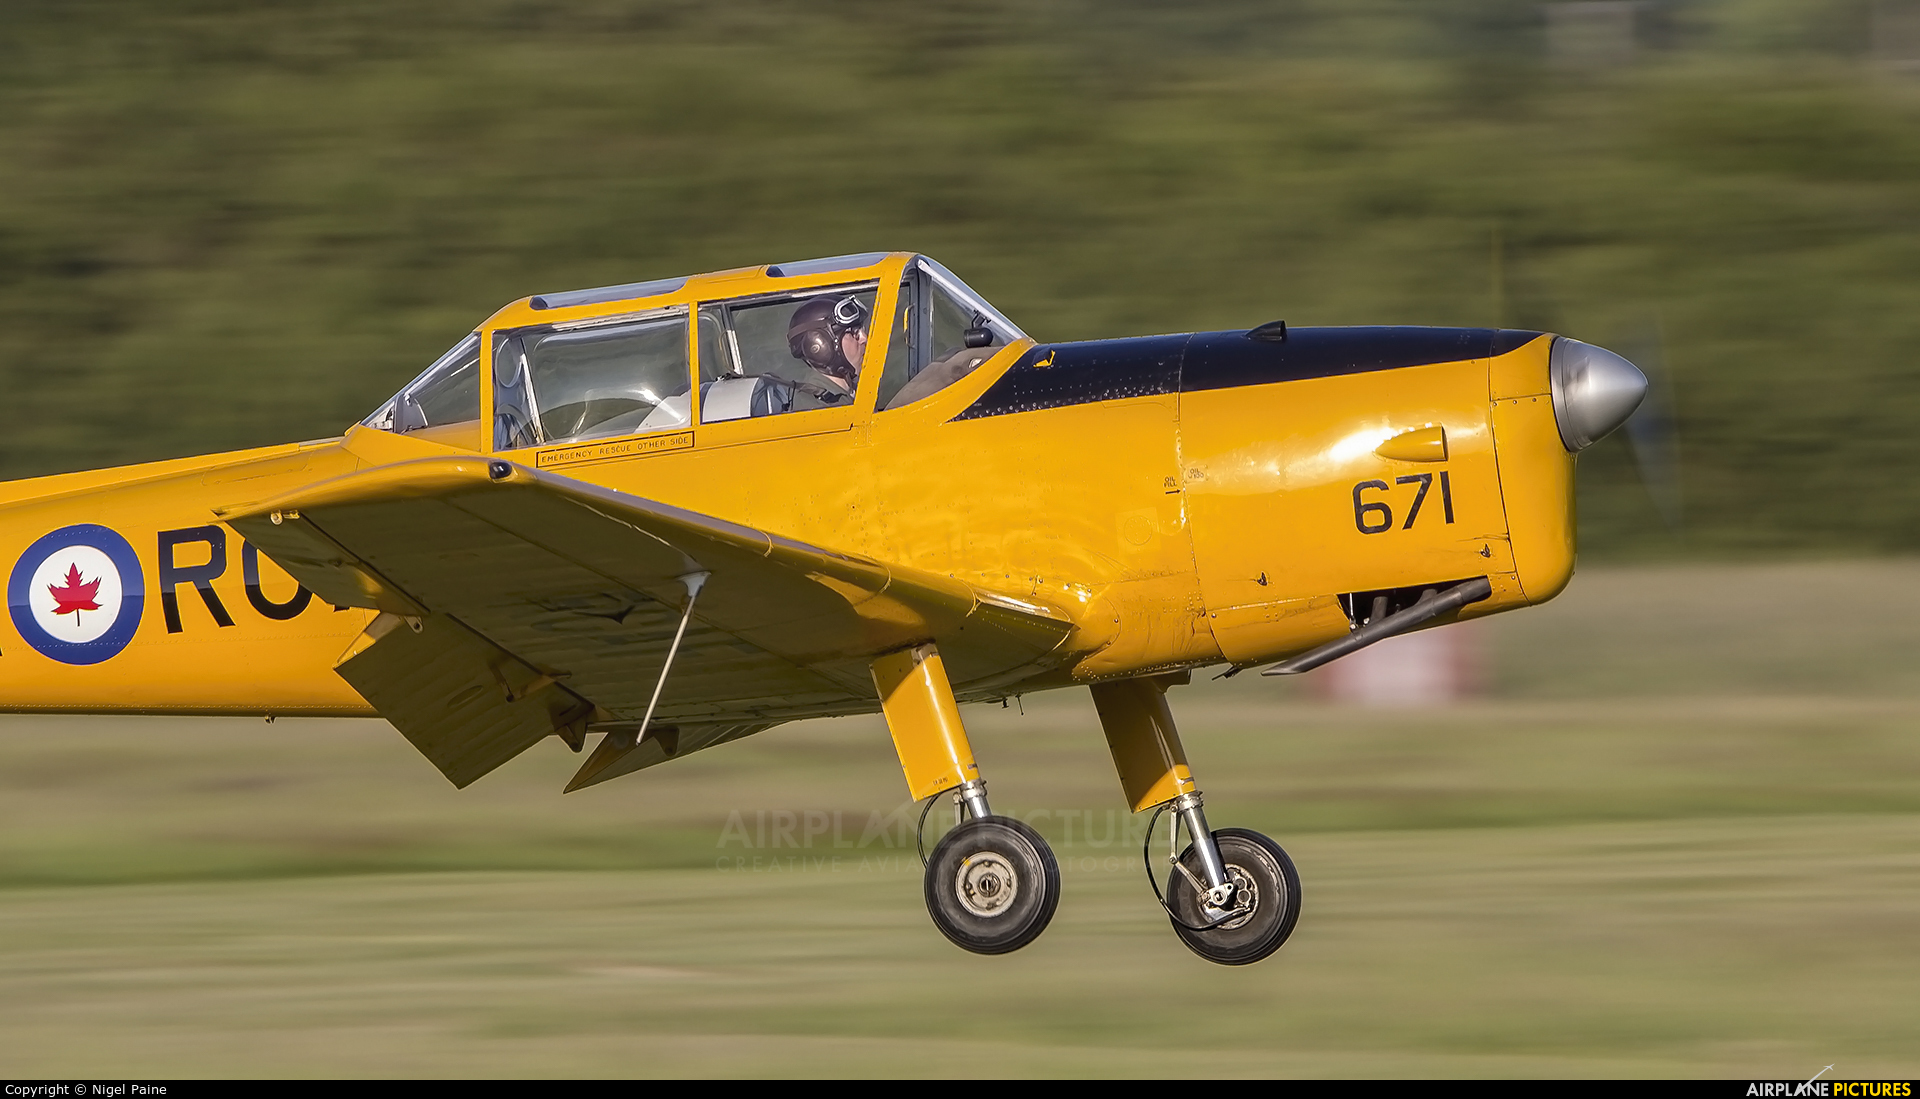 The Shuttleworth Collection G-BNZC aircraft at Old Warden